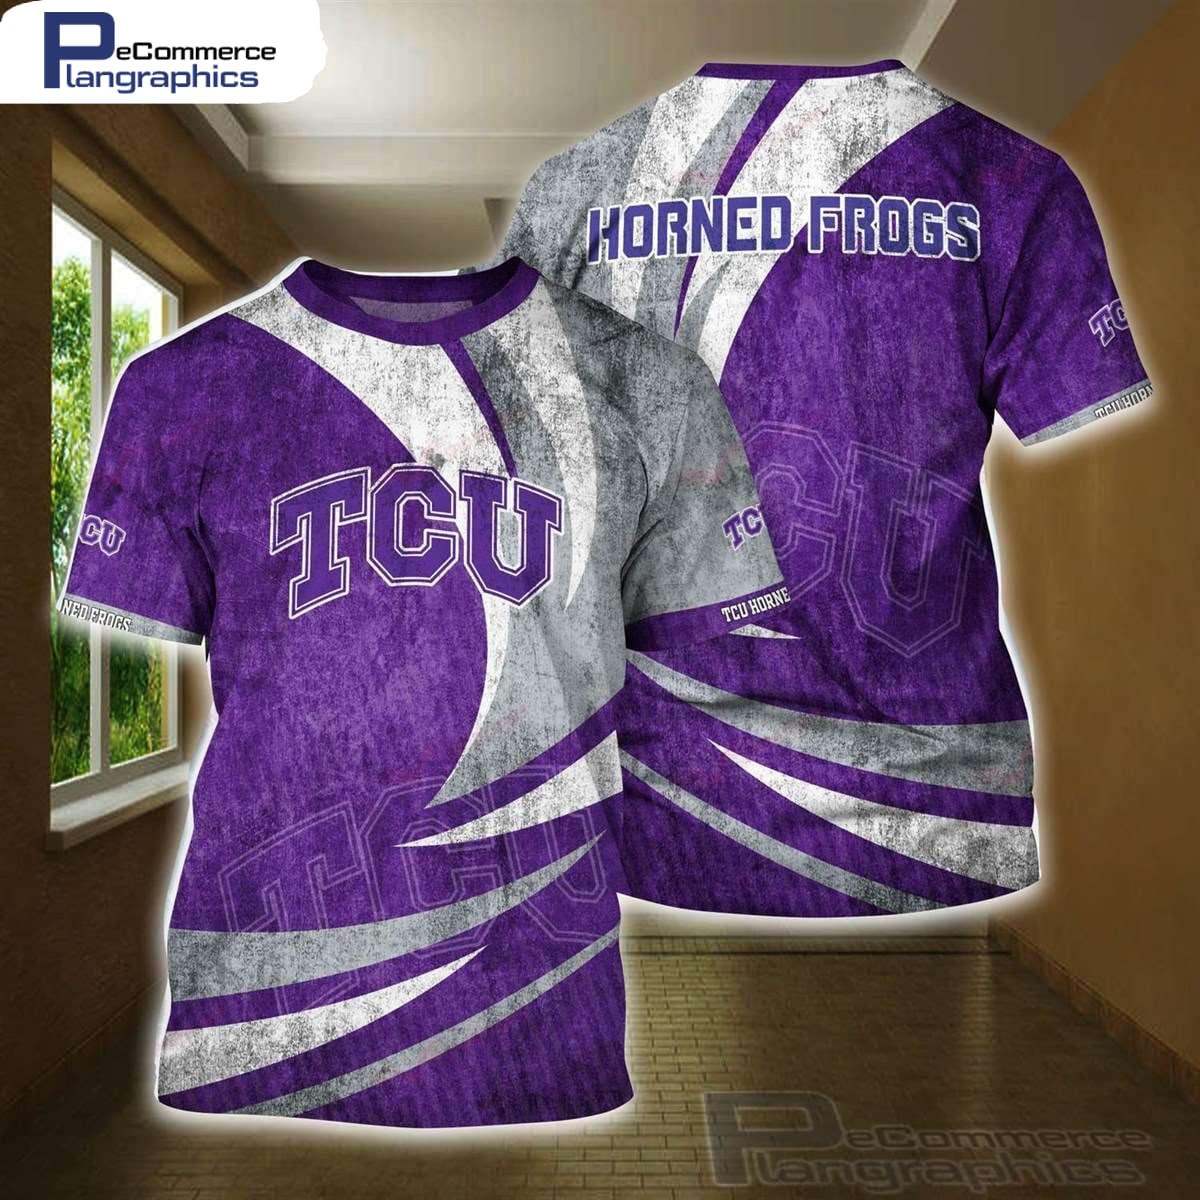 Tcu Horned Frogs NCAA All Over Printed T-Shirt